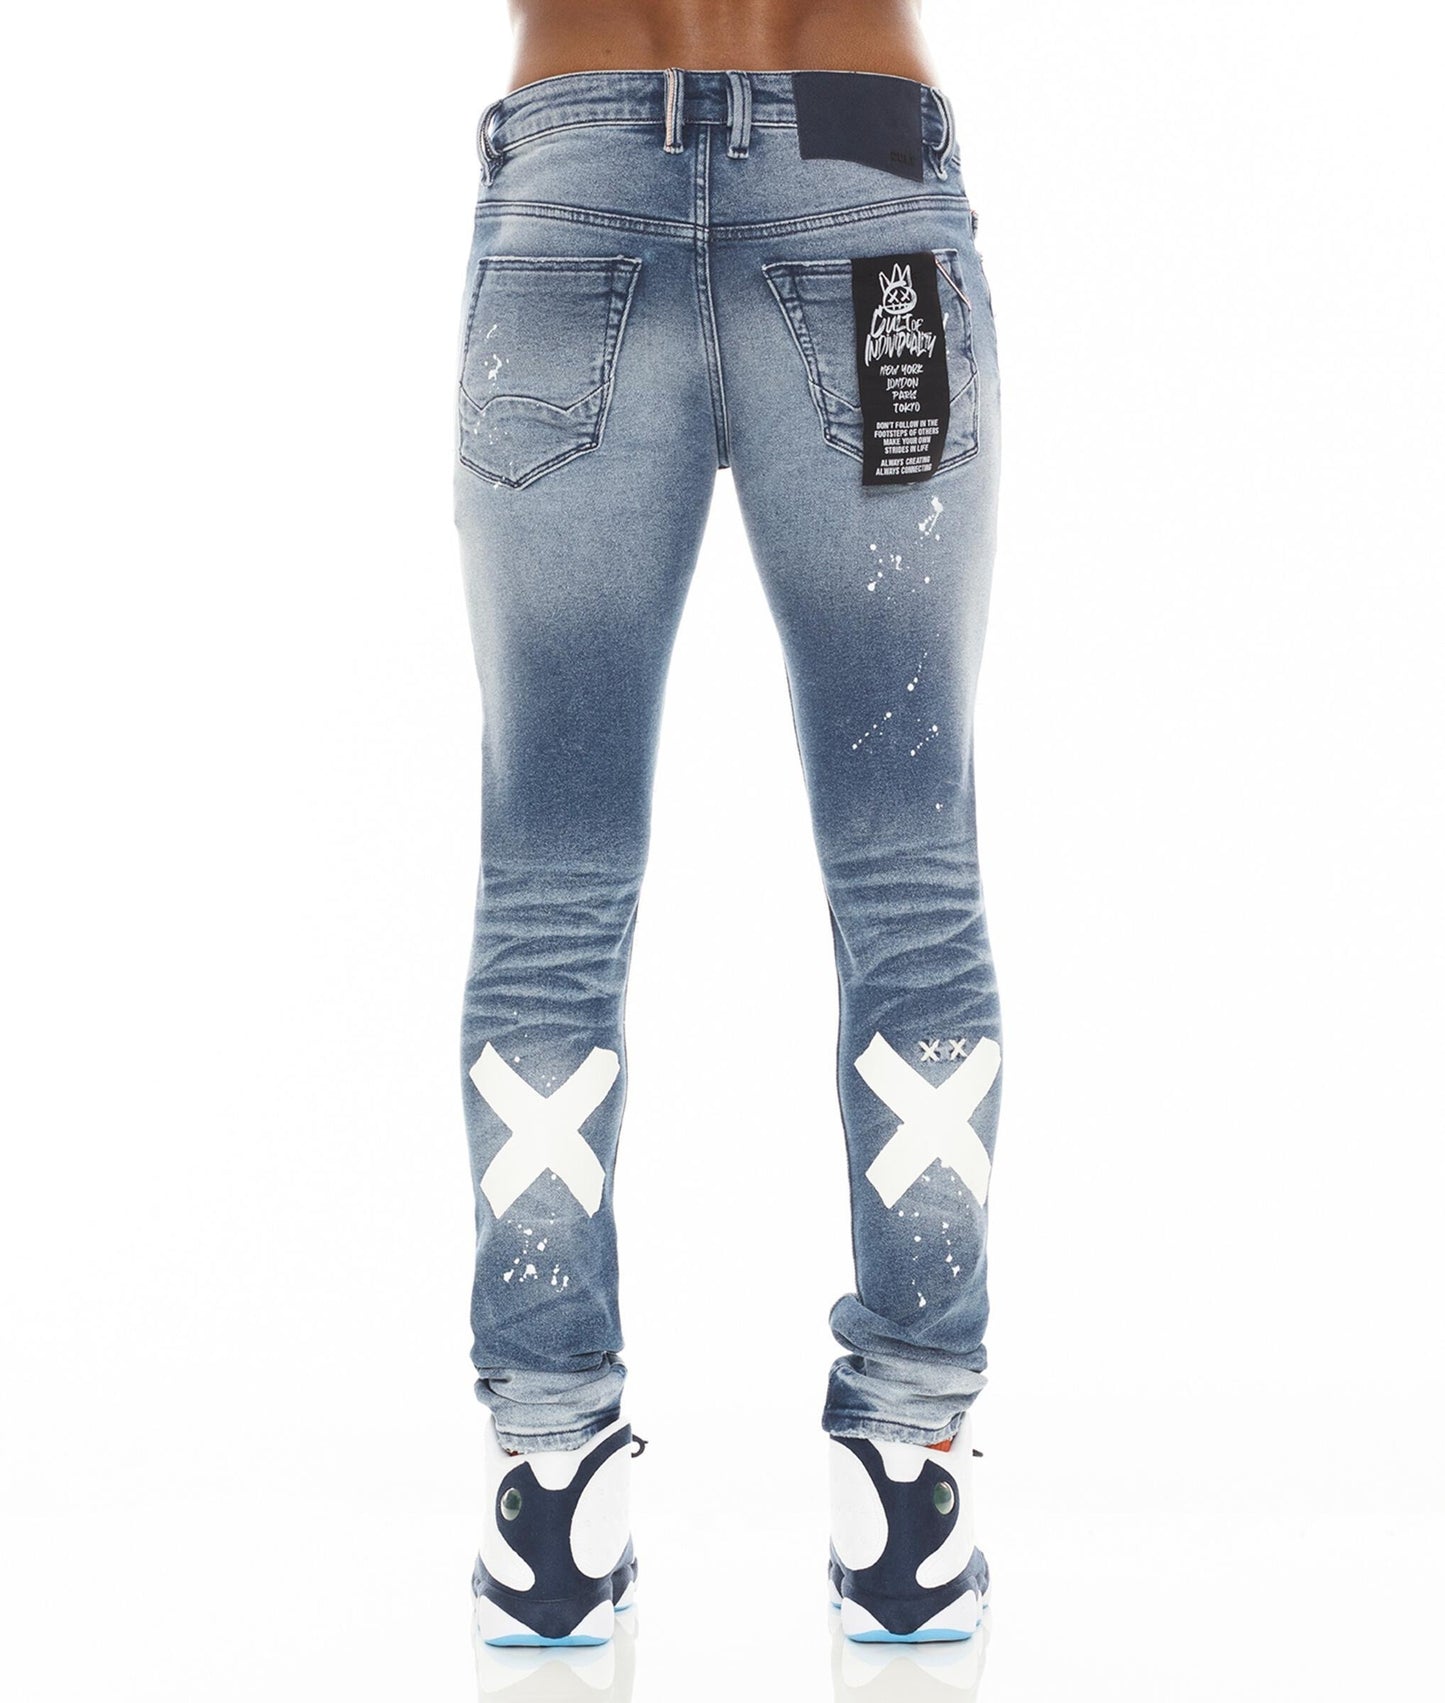 Men, Boys, Teens, Gifts, Wmns, Girls,Urban, Style, Fashion, Cult Of Individuality, Blue Jeans, Light Blue, Jeans, Tape, White Tape, White Paint Splatter, 